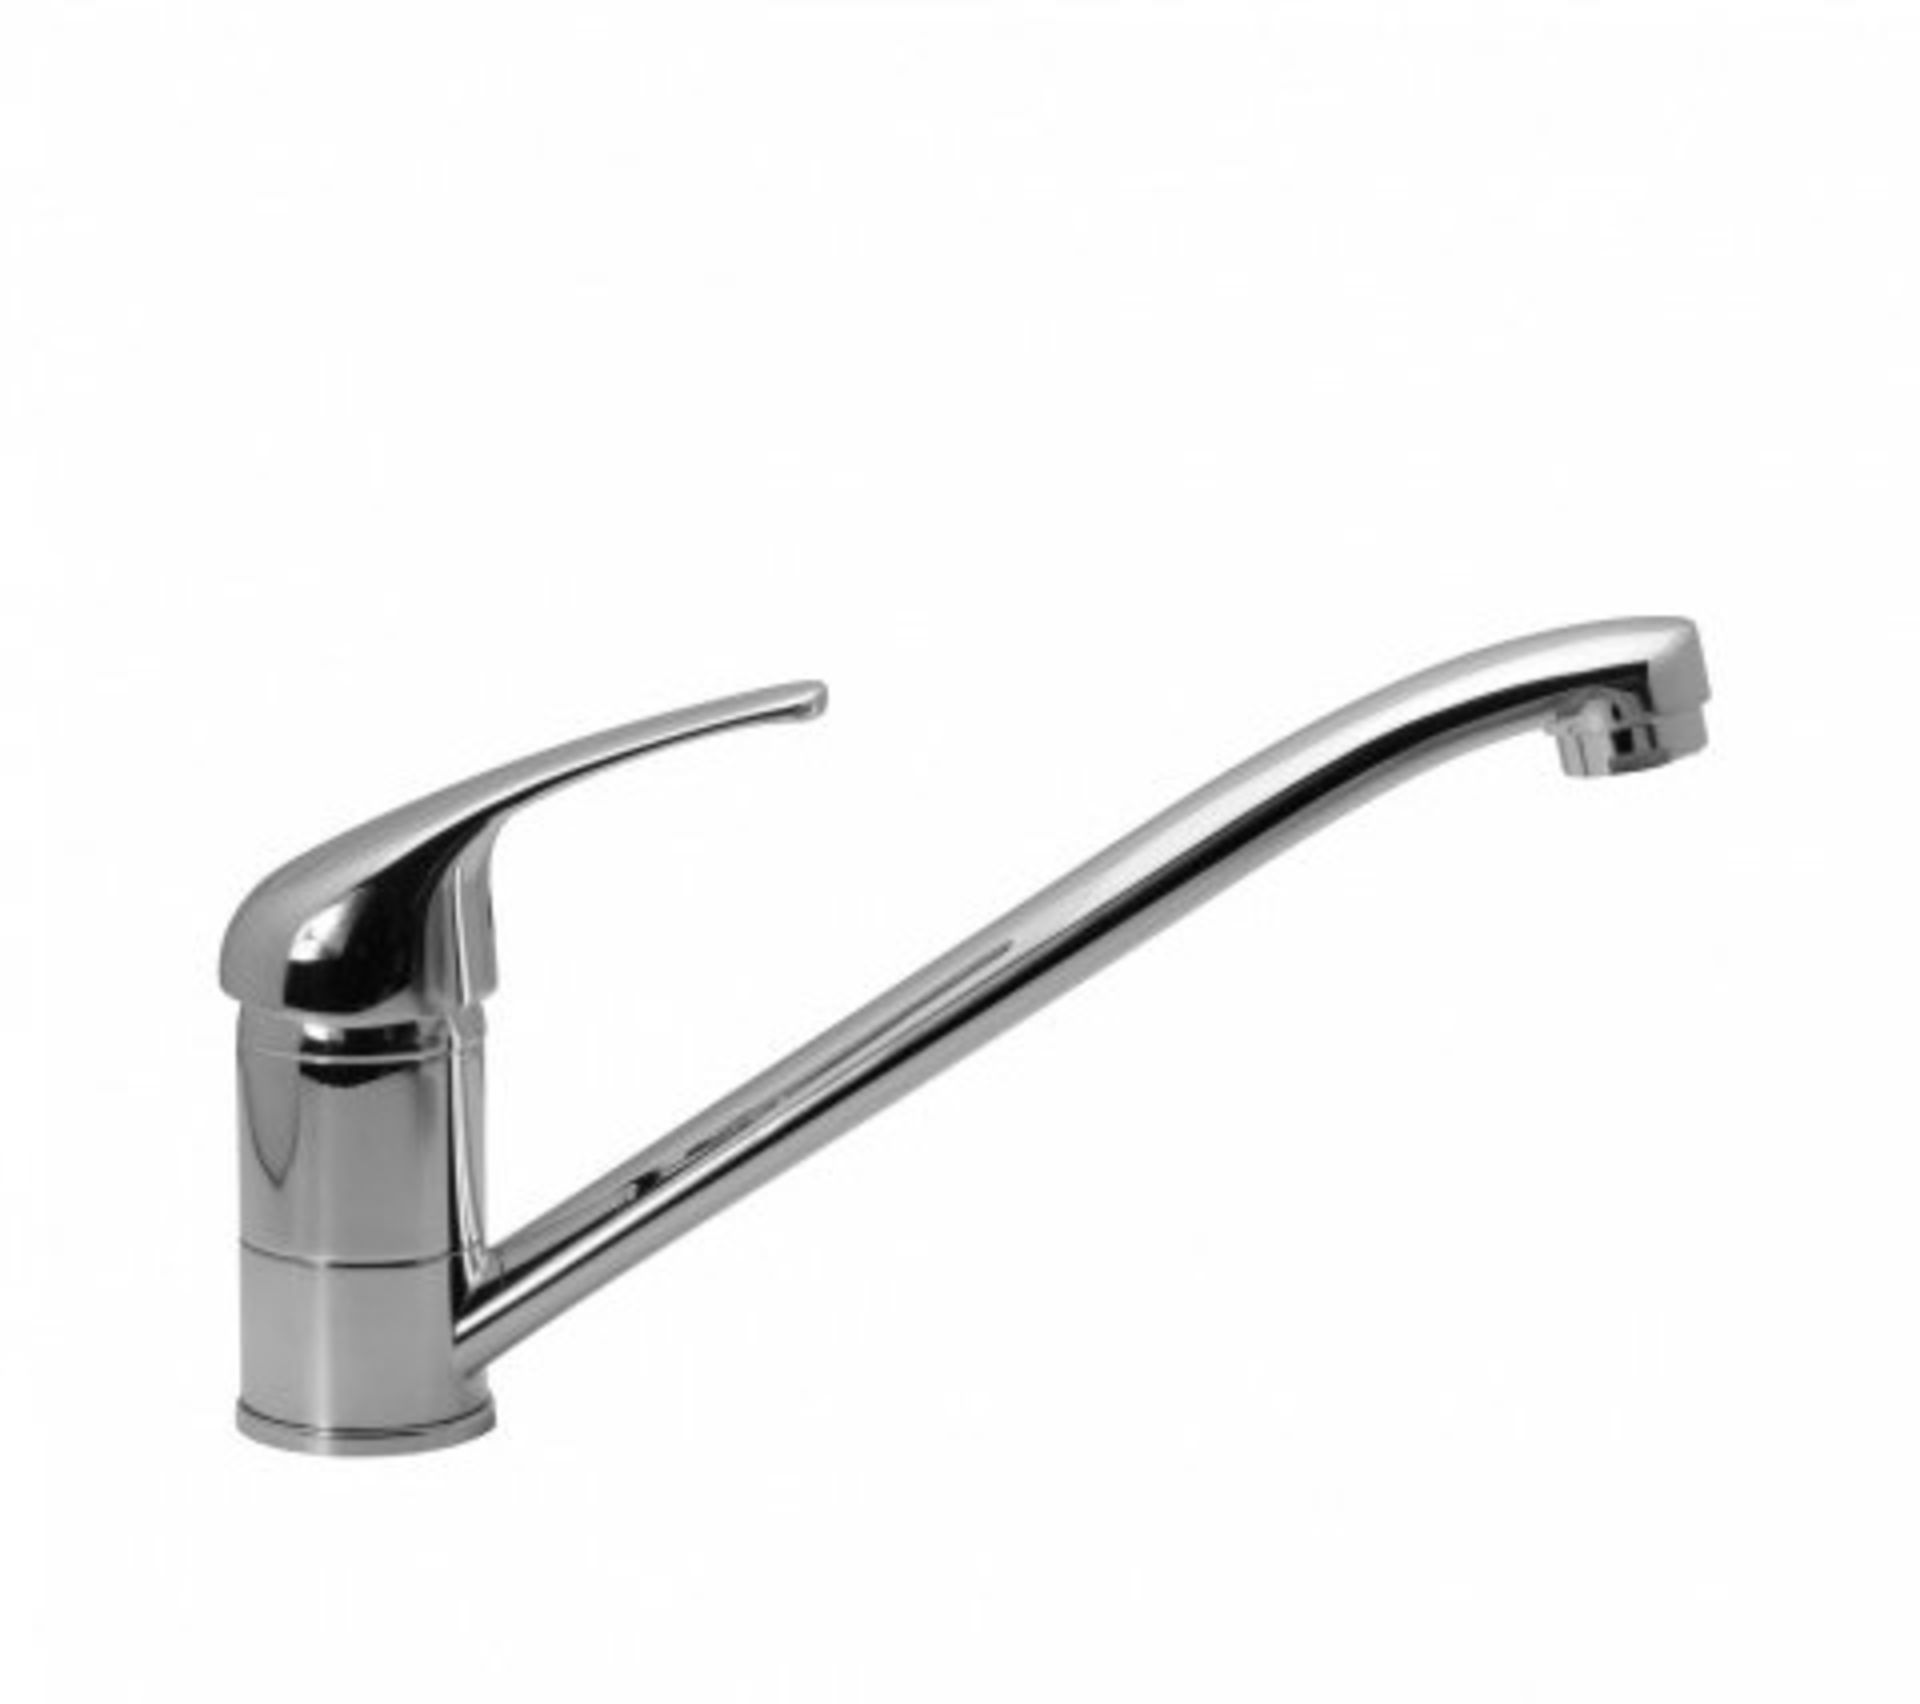 AA102- Tessa Chrome Plated Kitchen Mixer Tap - Swivel Spout The lengthy, bold design of the Tessa